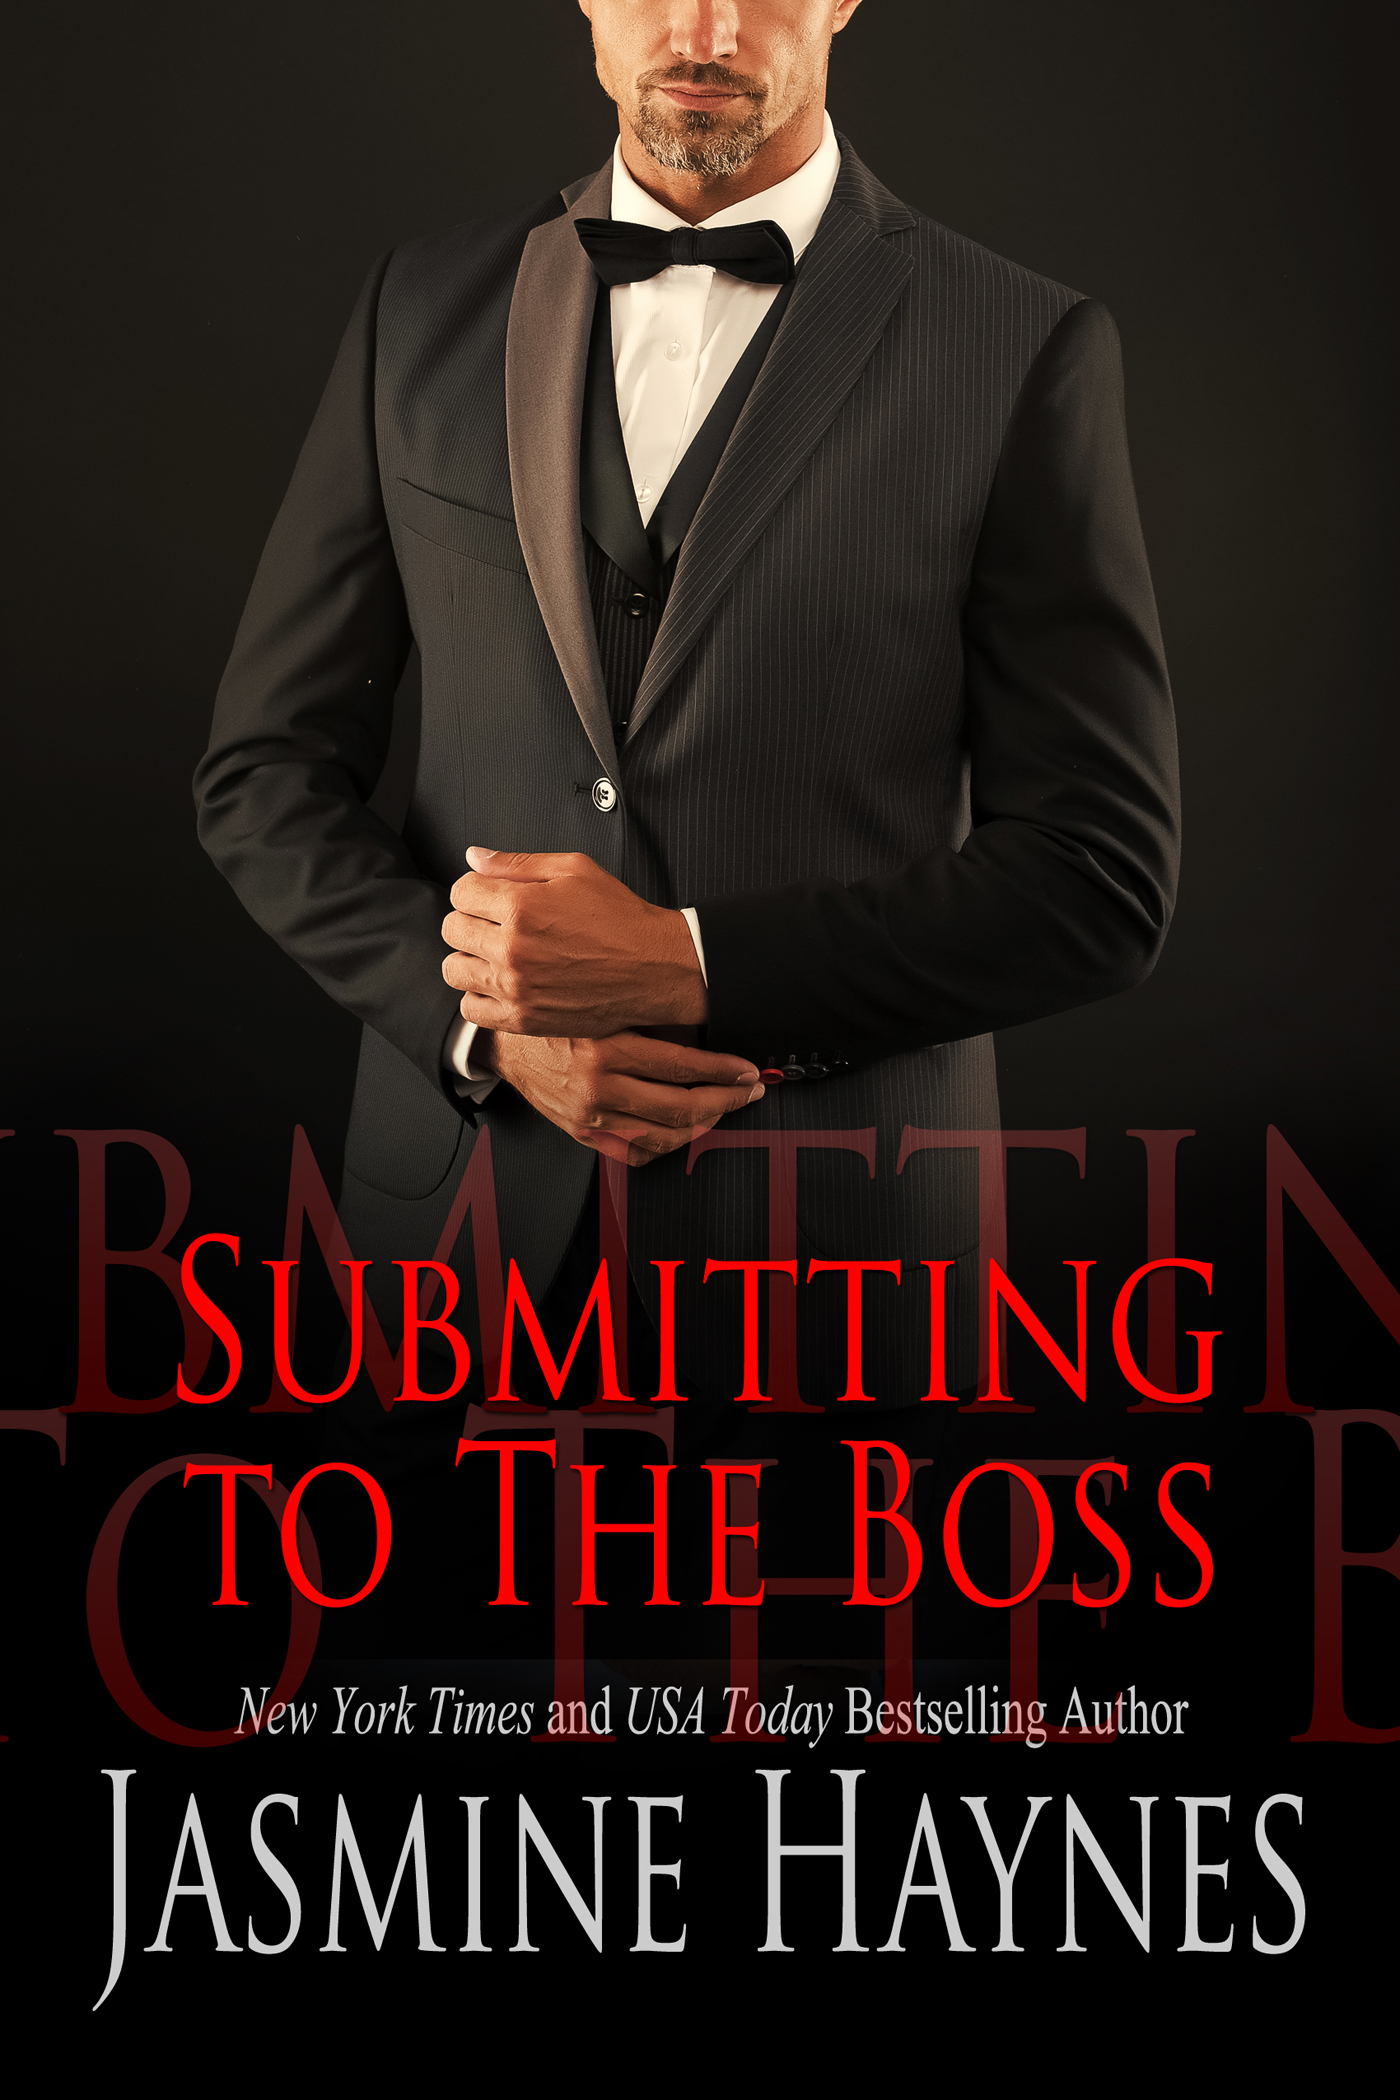 Cover of Submitting to the Boss by New York Times and USA Today Bestselling Author Jasmine Haynes